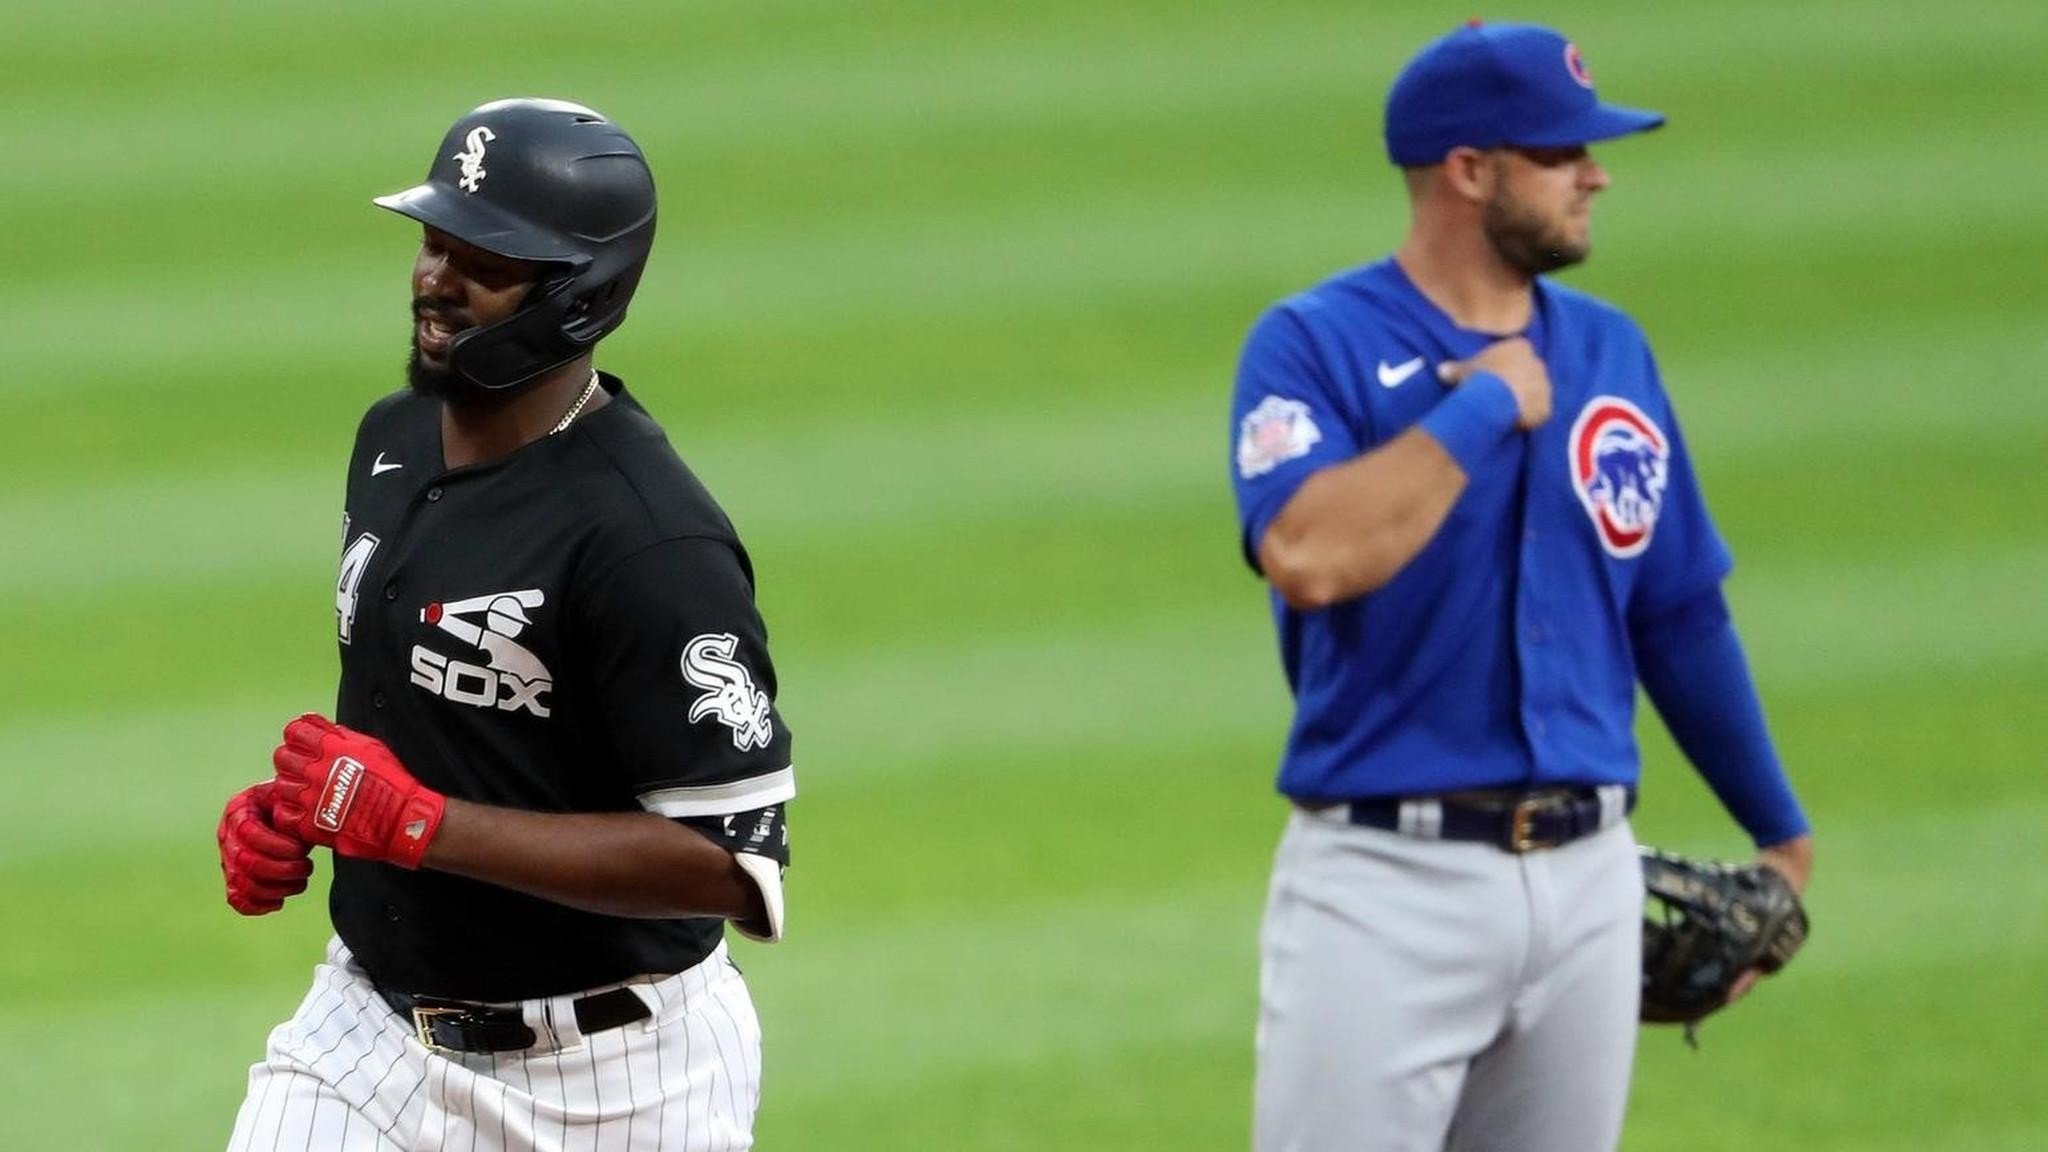 Chicago Cubs & White Sox Preview By Former World Series Champion